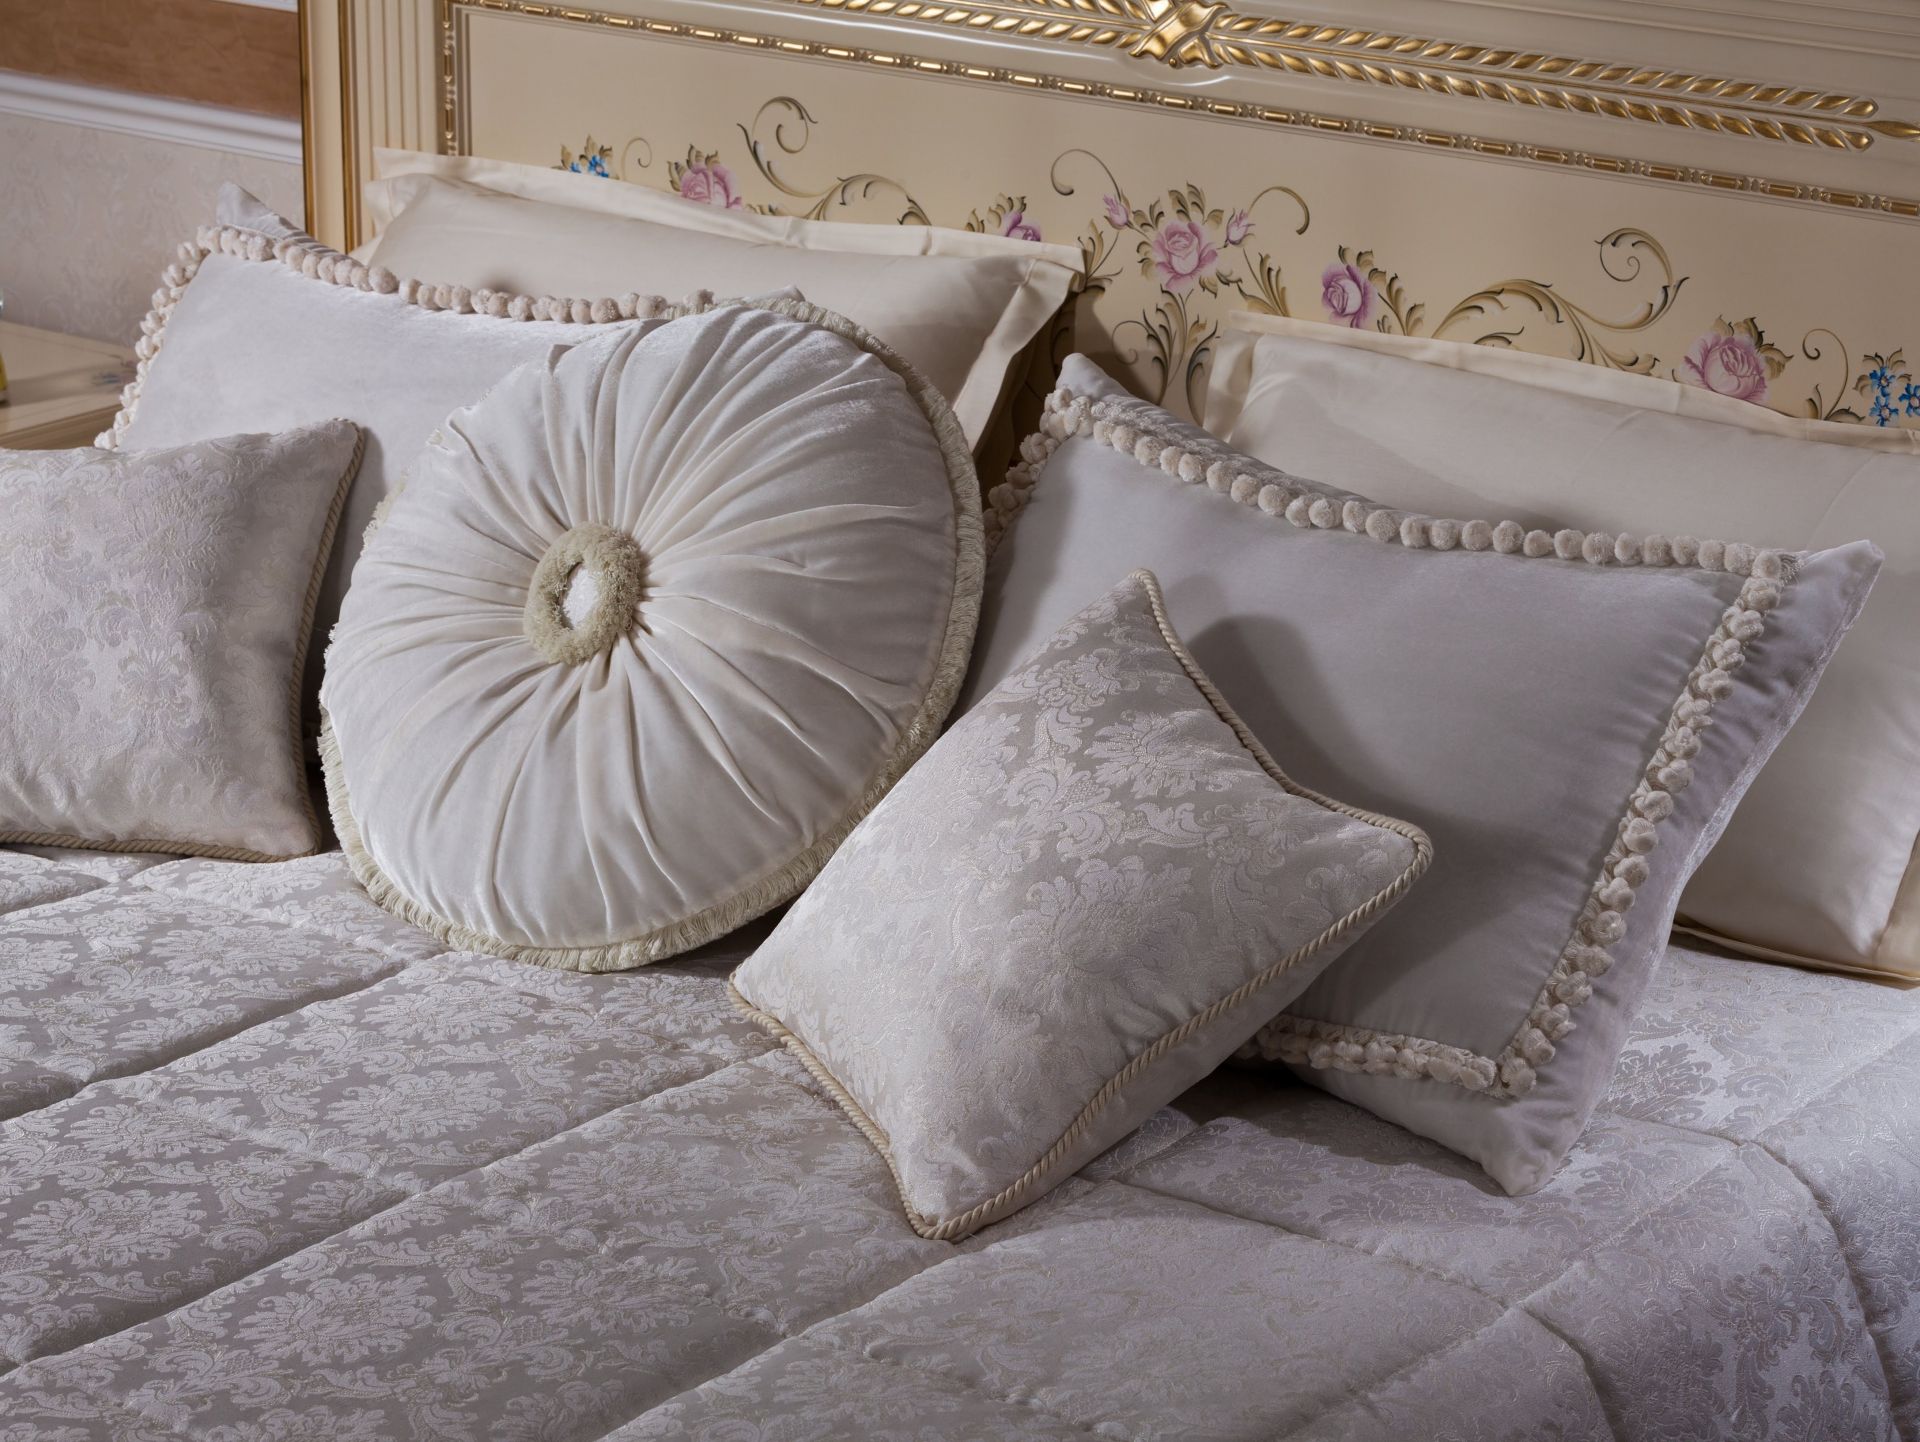 Decorative pillows for a bedroom